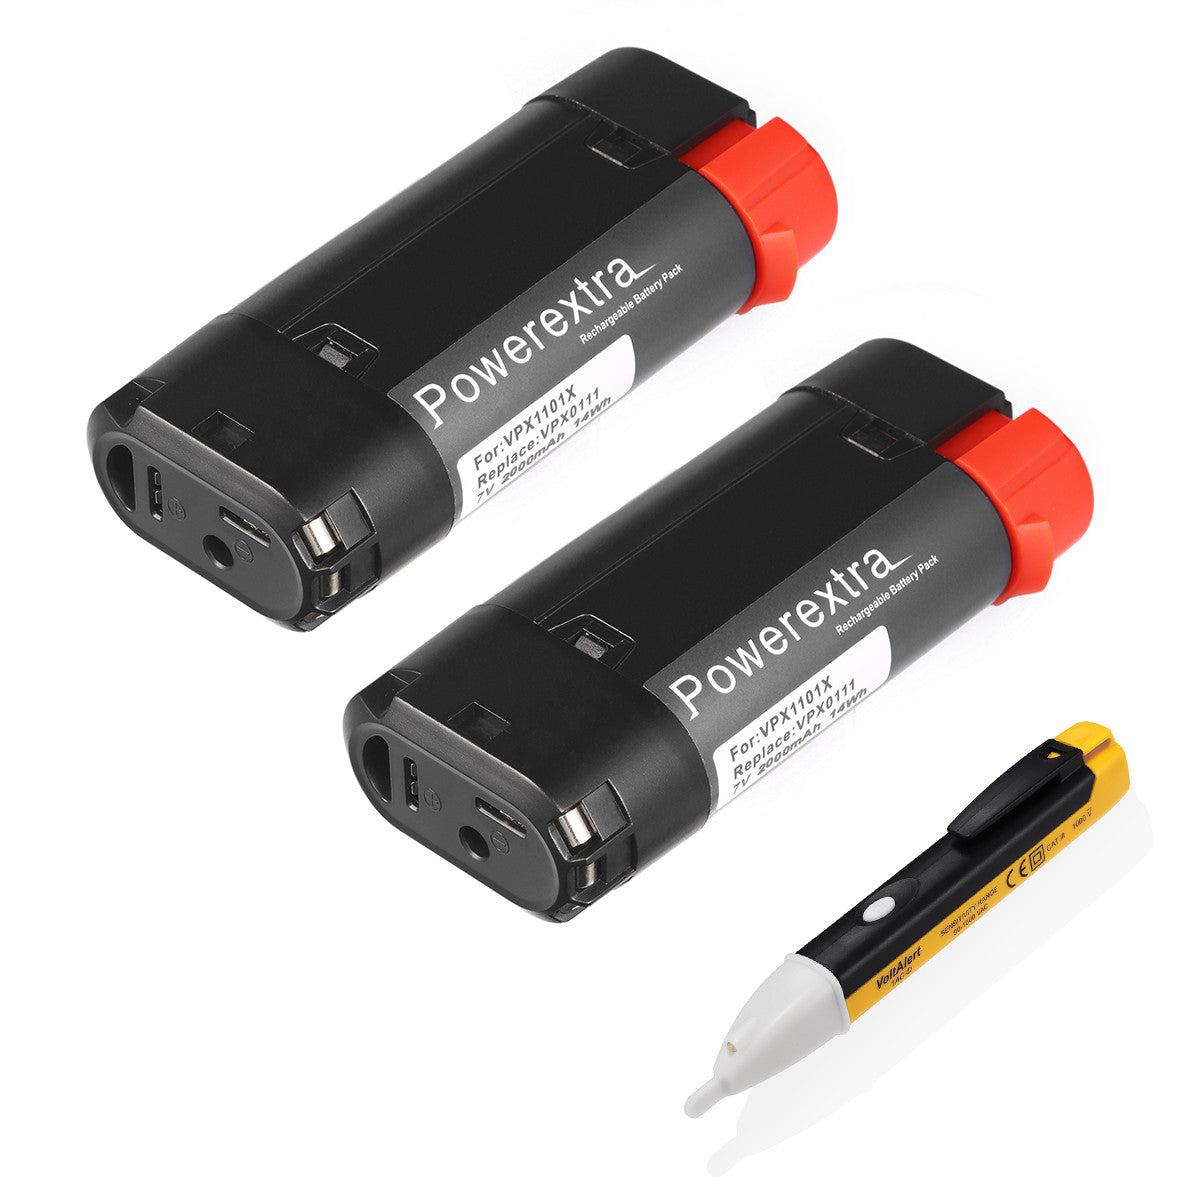 Powerextra 7V Battery for BLACK & DECKER VPX1101, VPX1101X Power Tools Battery Replacement